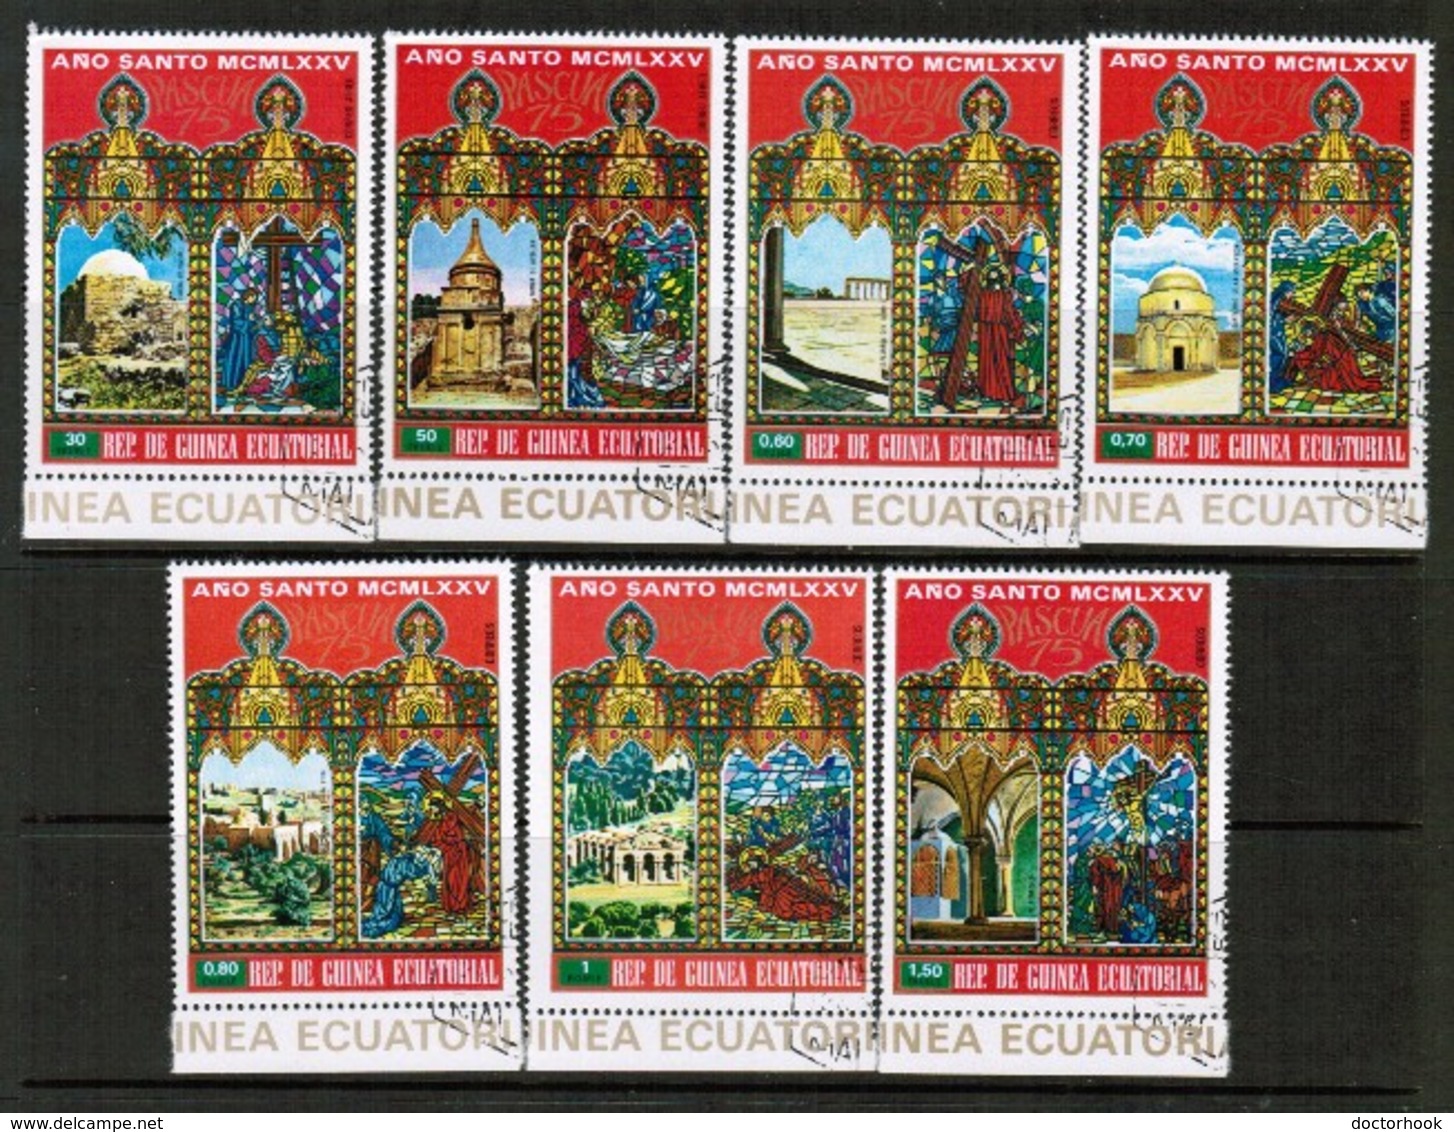 EQUATORIAL GUINEA  Scott # UNLISTED VF USED EASTER PAINTINGS (Stamp Scan # 504) - Equatorial Guinea